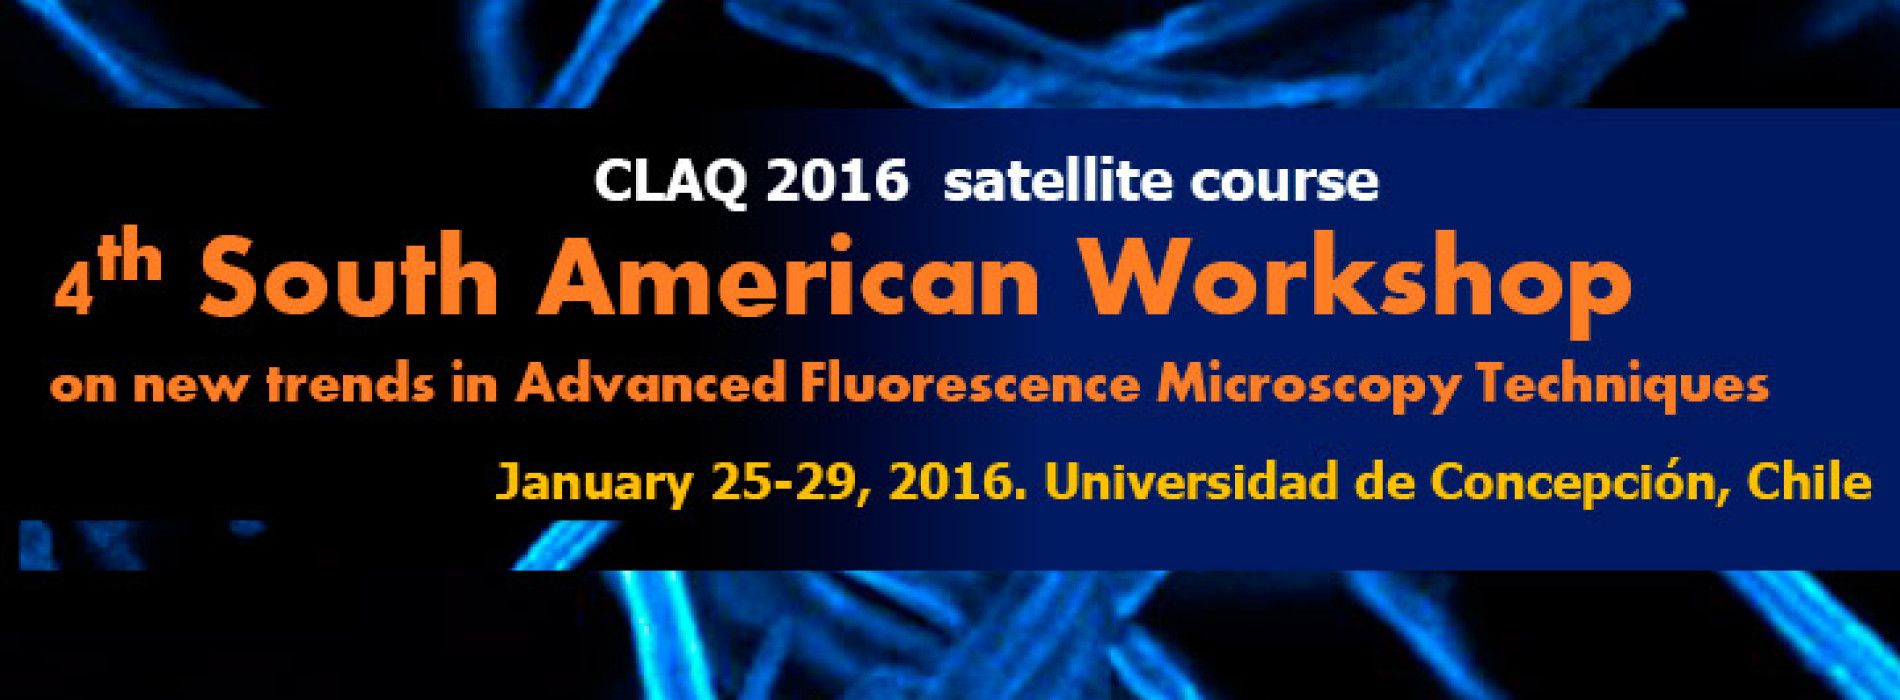 4th South American Workshop. On new trends in Advanced Fluorescence Microscopy Techniques